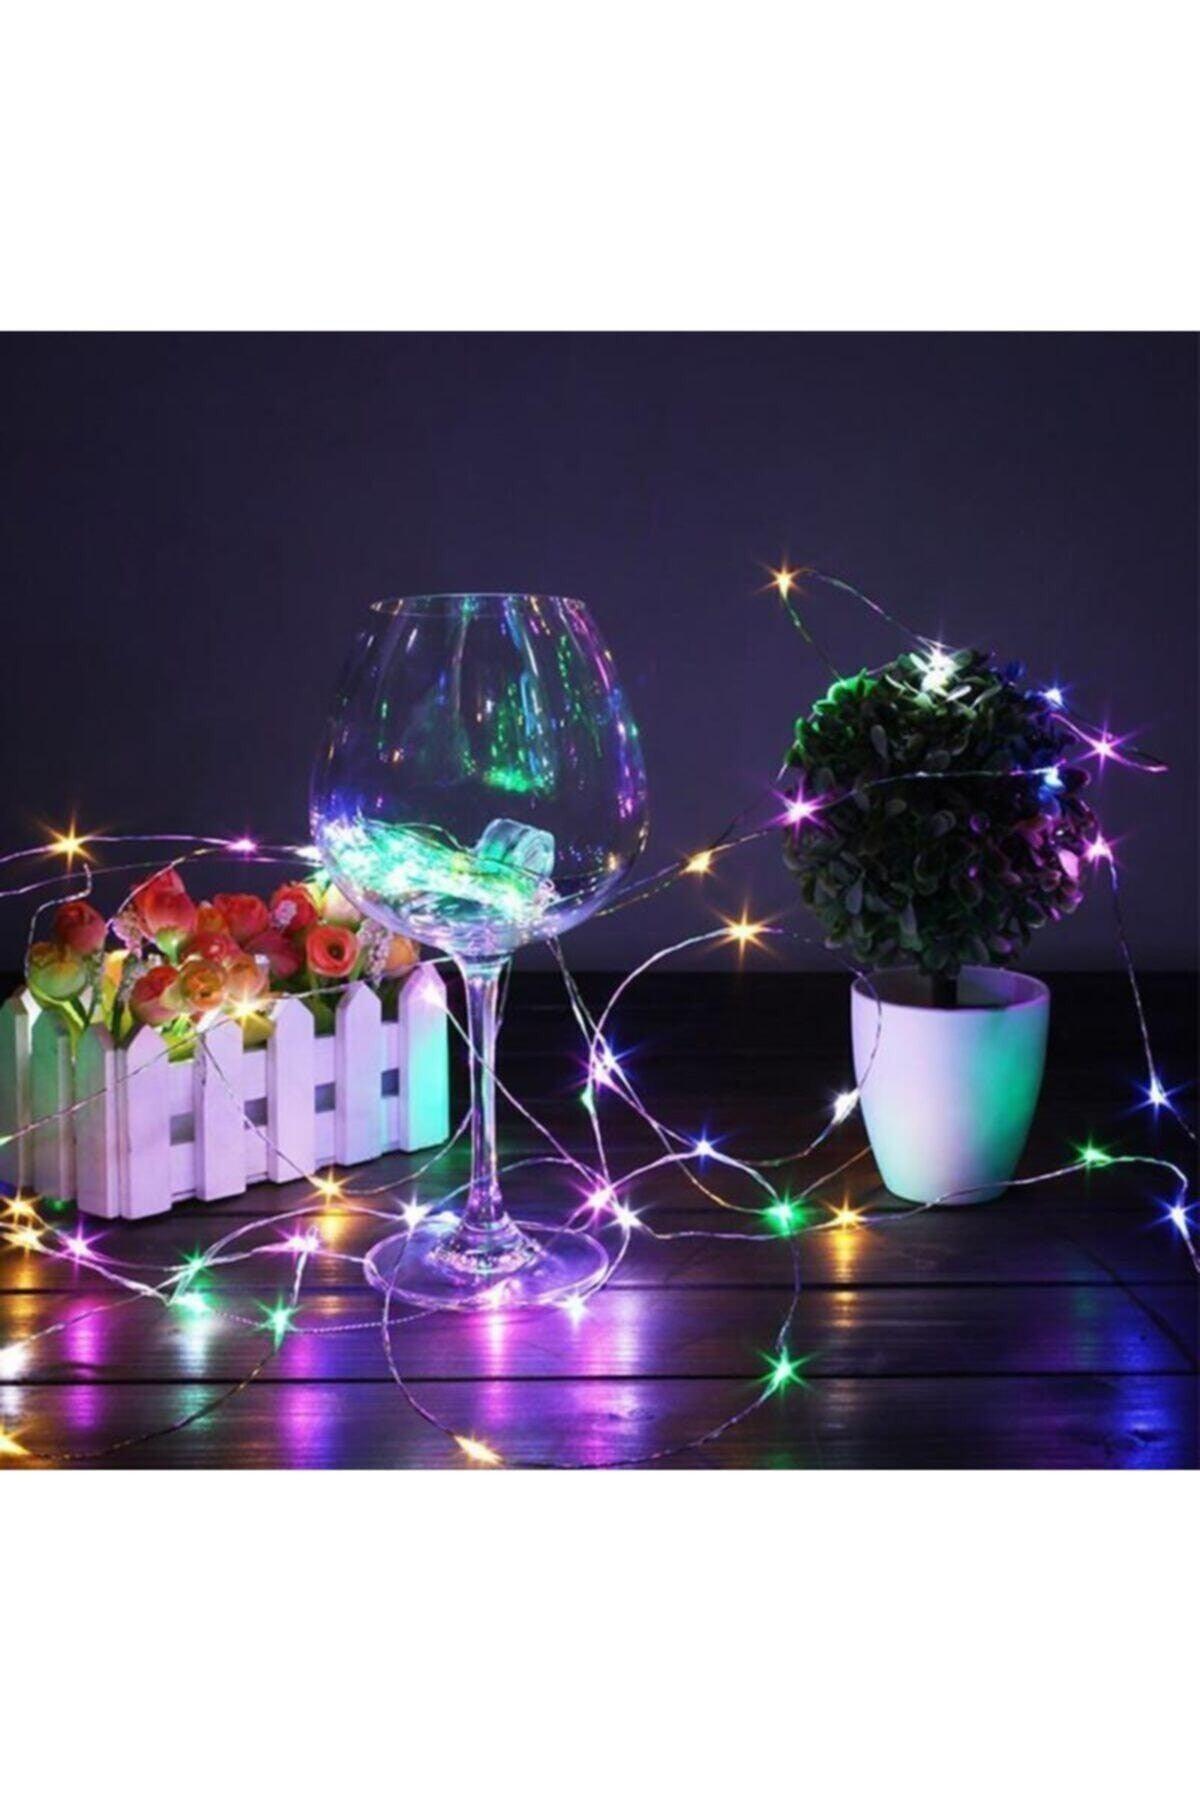 Colorful Fairy Led Light 2 Meter Decorative With Battery